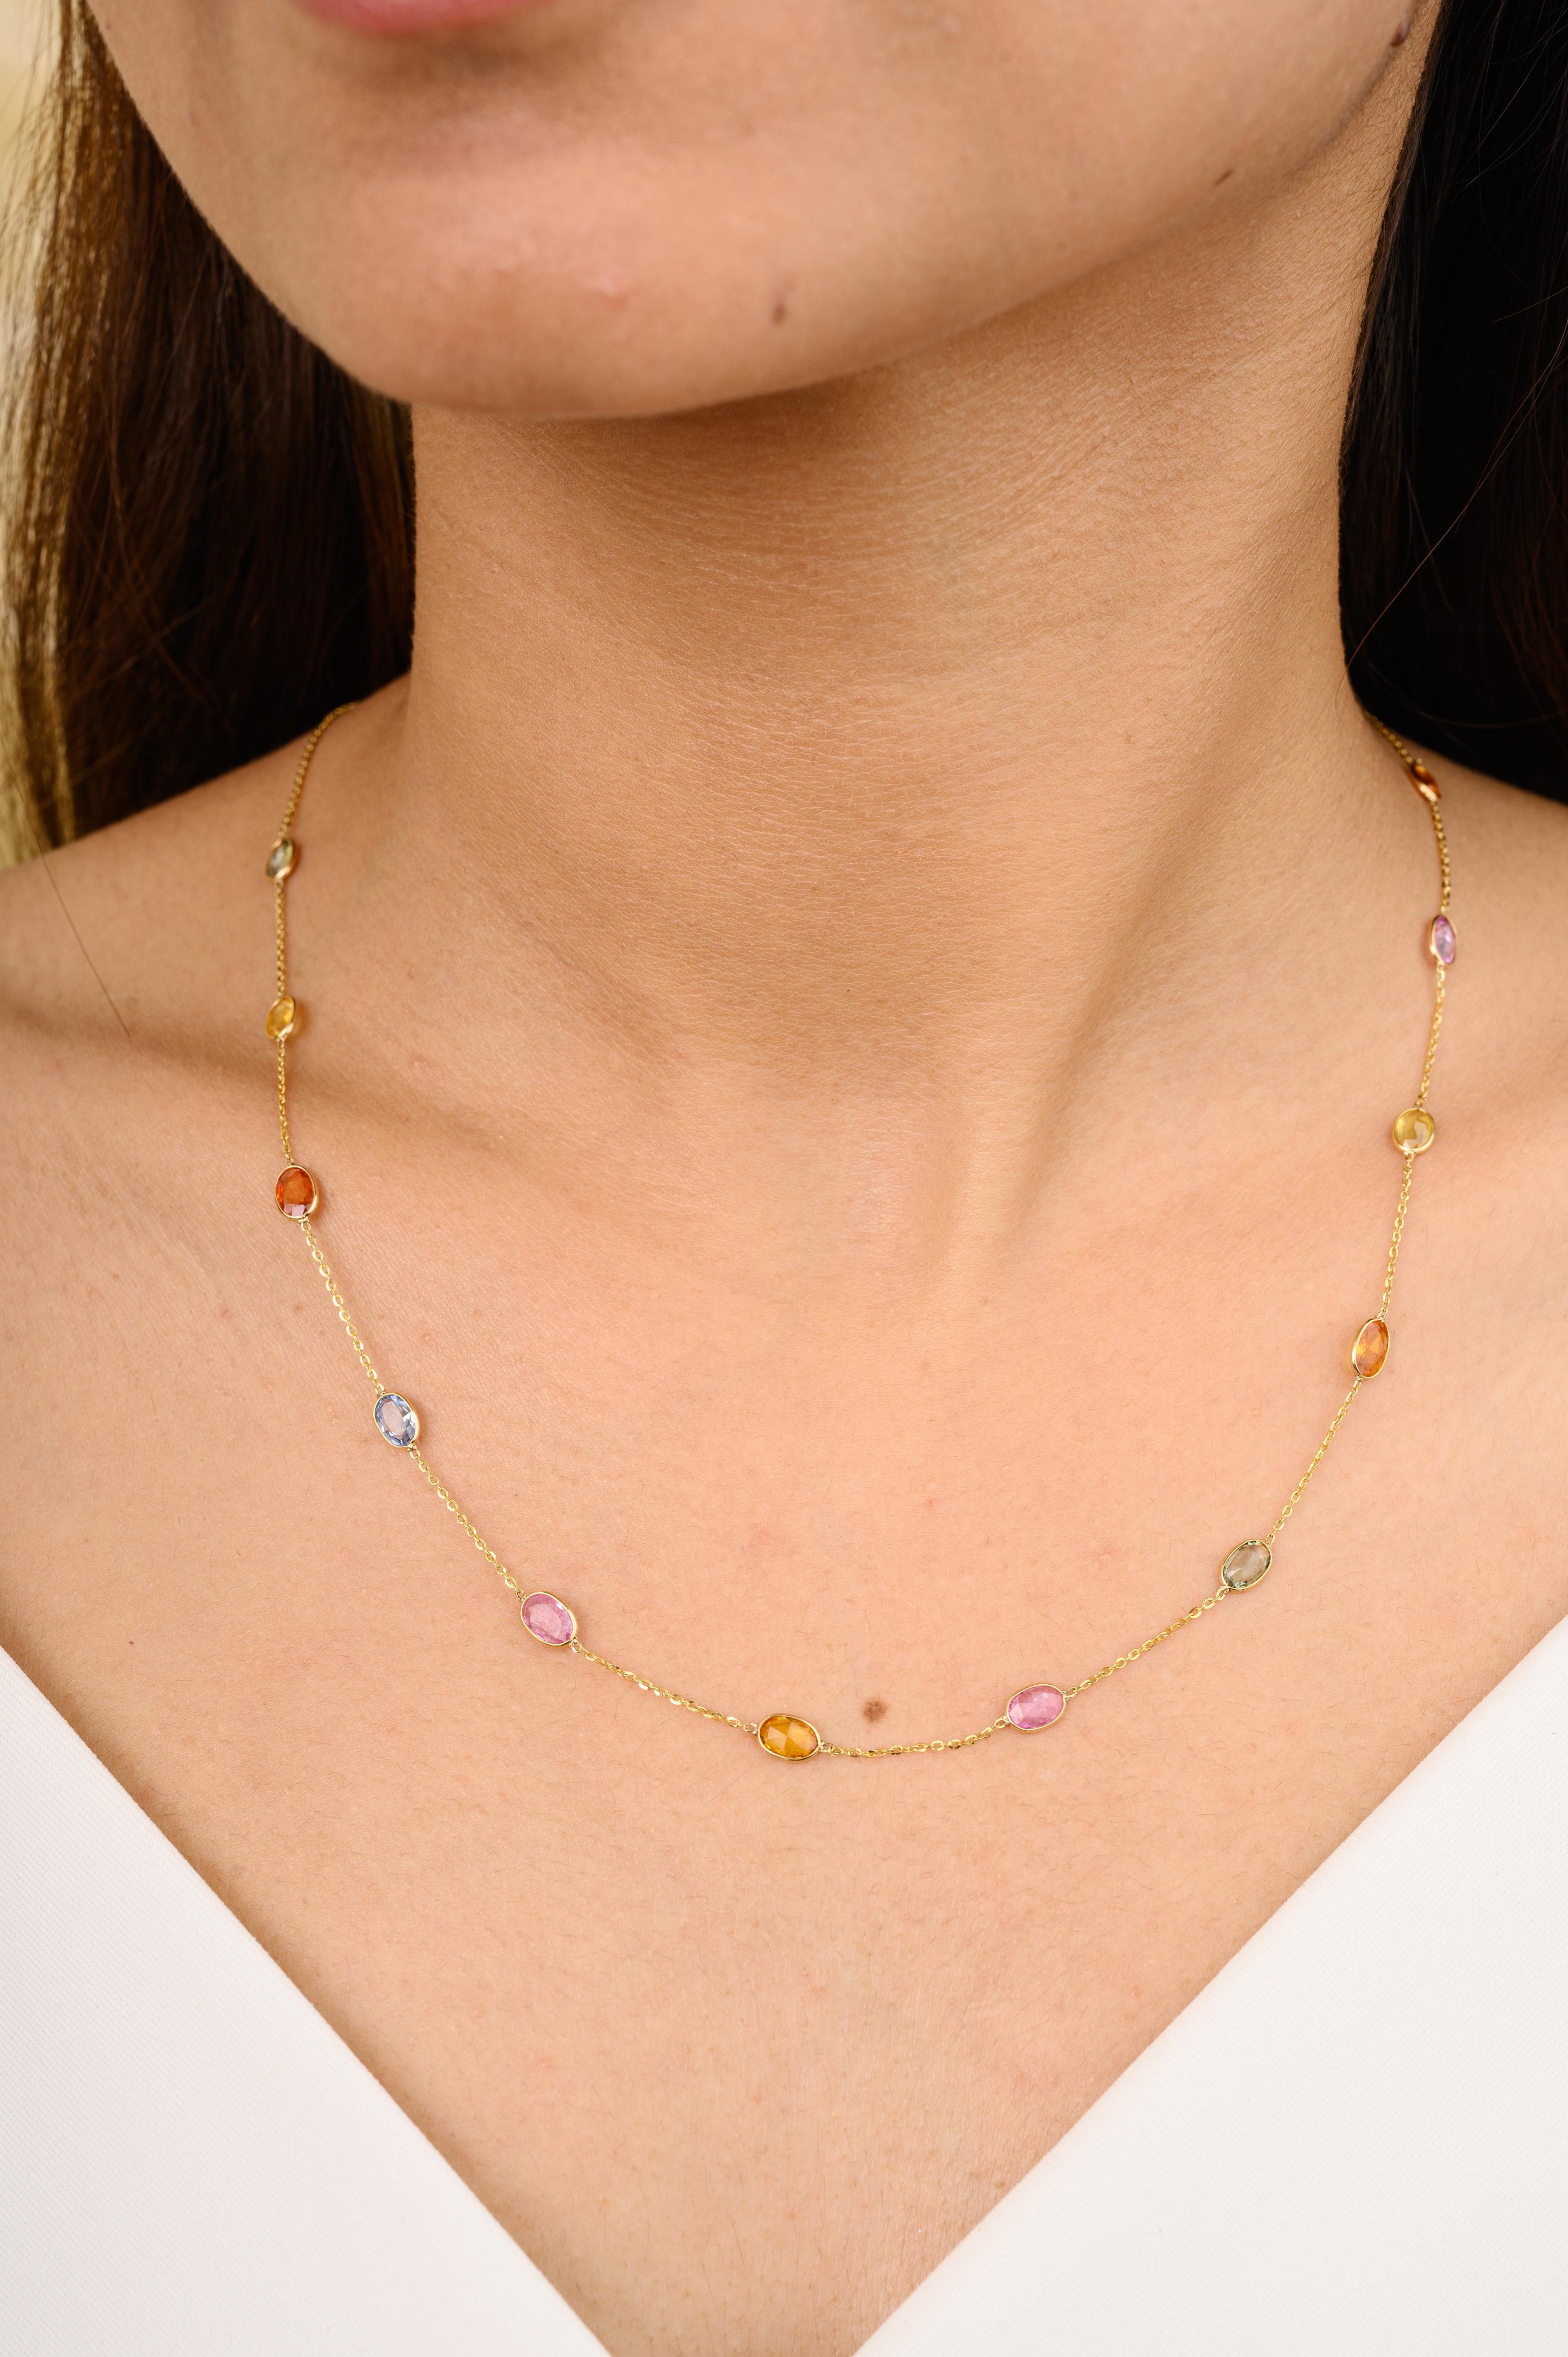 Certified Multi Sapphire Station Chain Necklace for Women in 18K Gold studded with oval cut multi sapphire. This stunning piece of jewelry instantly elevates a casual look or dressy outfit. 
Sapphire stimulate concentration and reduces